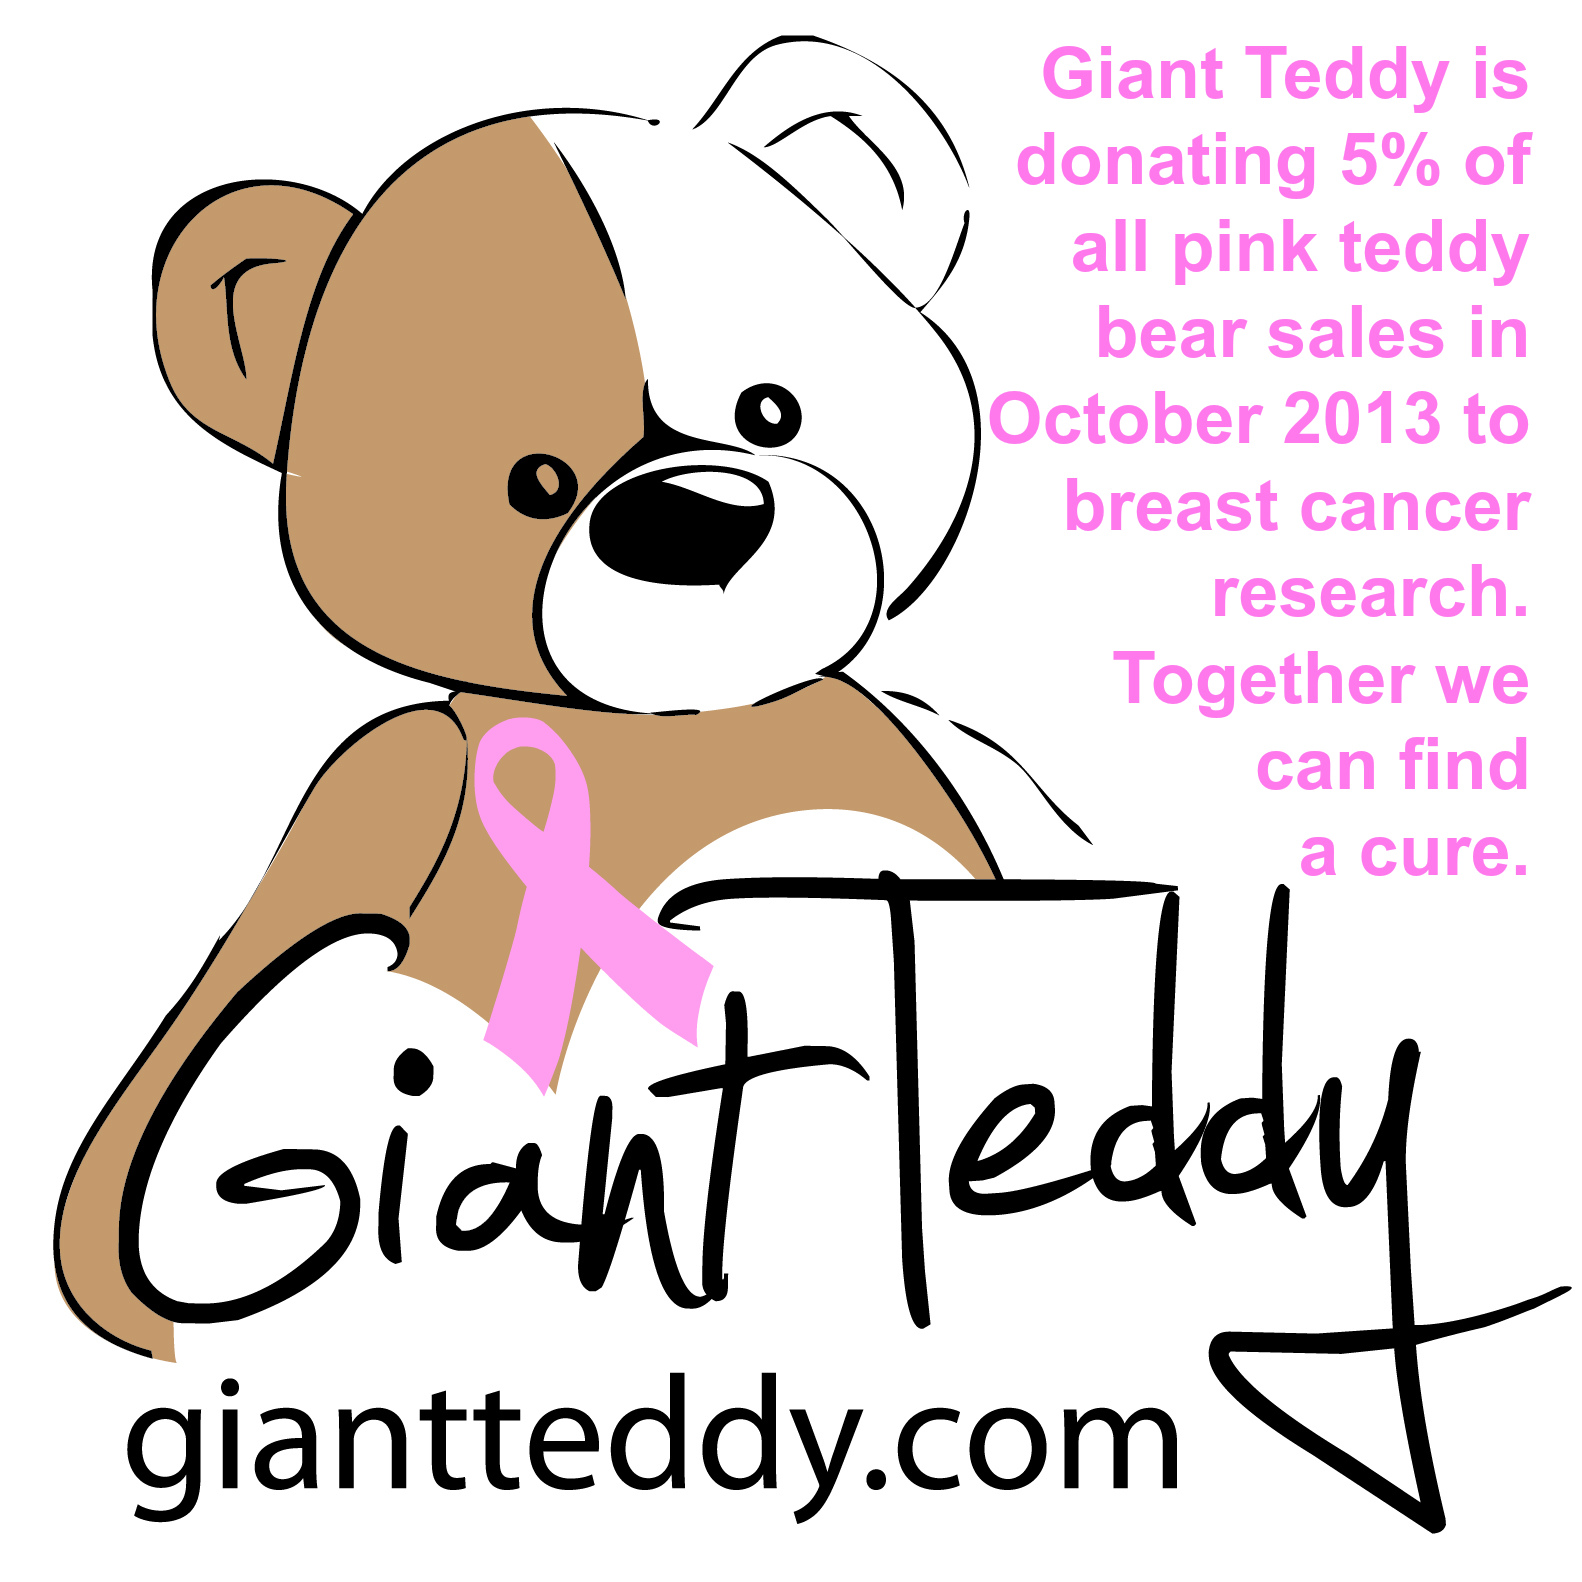 Giant Teddy supports October Breast Cancer Awareness month